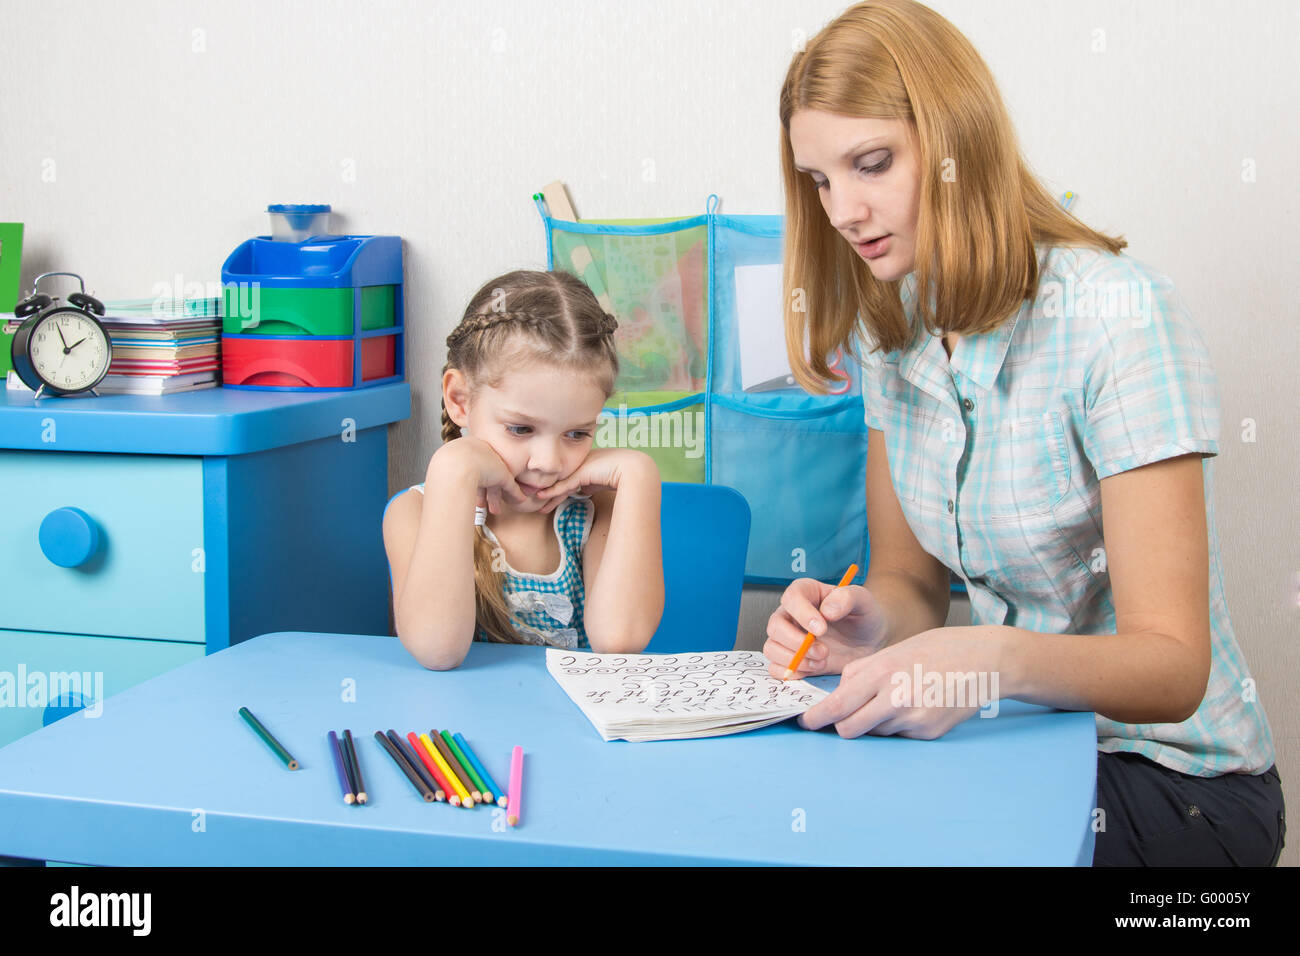 Five-year girl with interest looks at the teaching material explained by an adult Stock Photo